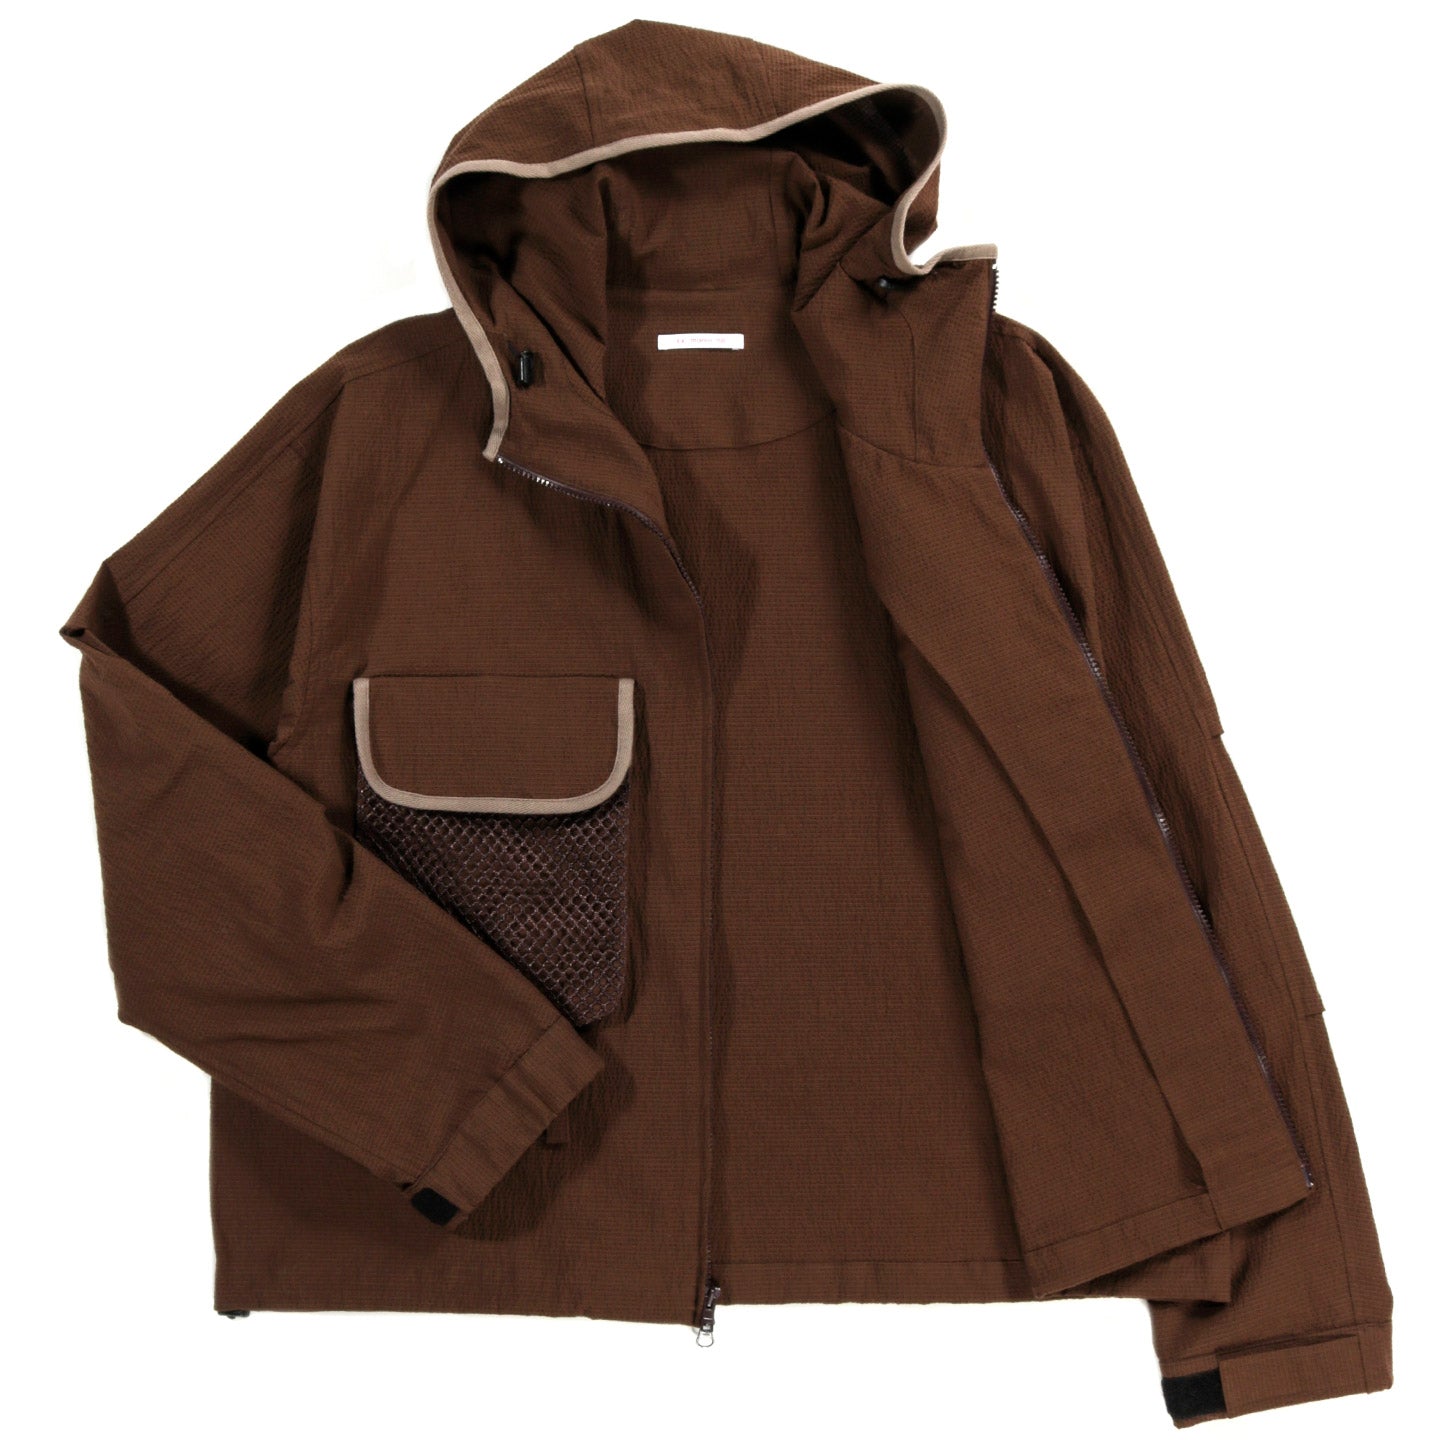 S.K. MANOR HILL WADING JACKET BROWN PUCKERED COTTON